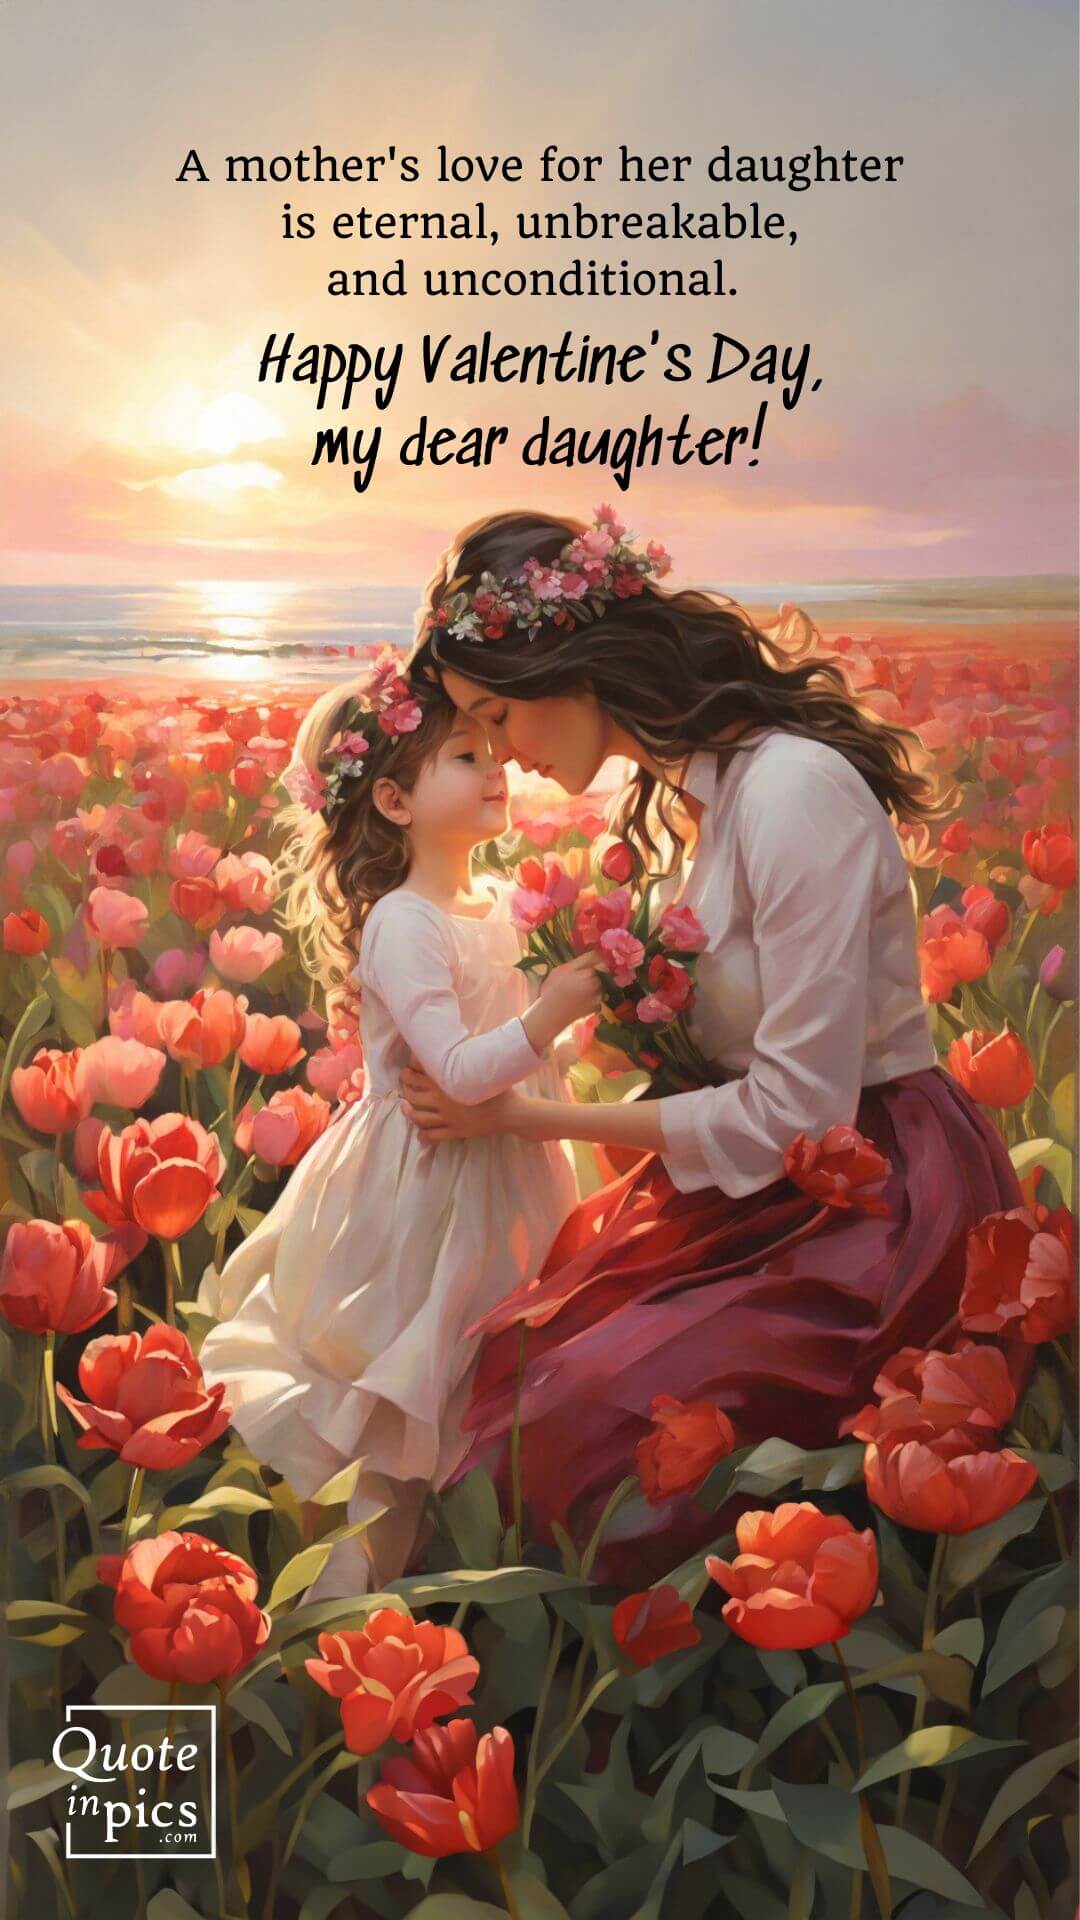 Mother to Daughter Valentine's Day Love Letter and Poem: Images and Messages to Share